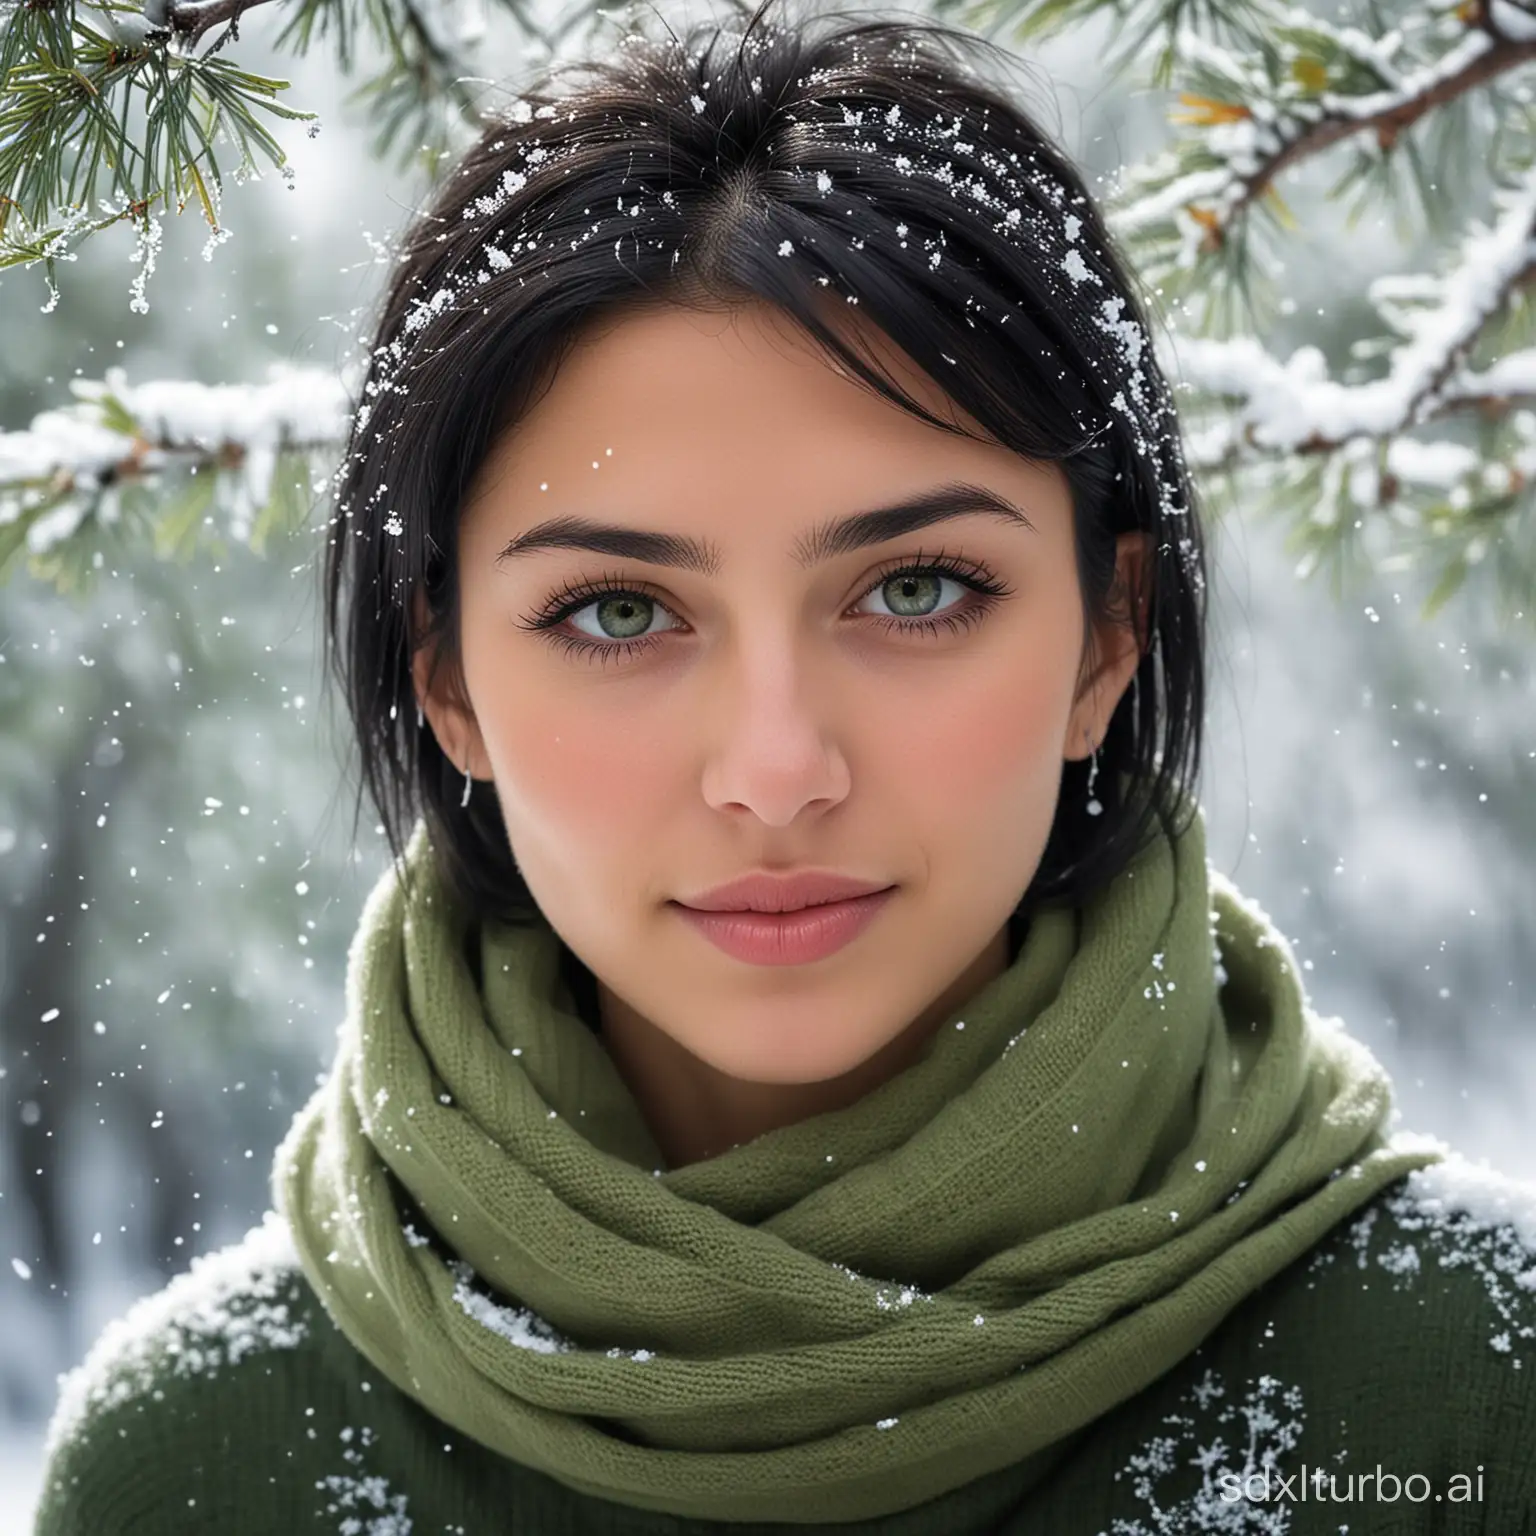 Young-Woman-Seeking-Refuge-Under-SnowCovered-Tree